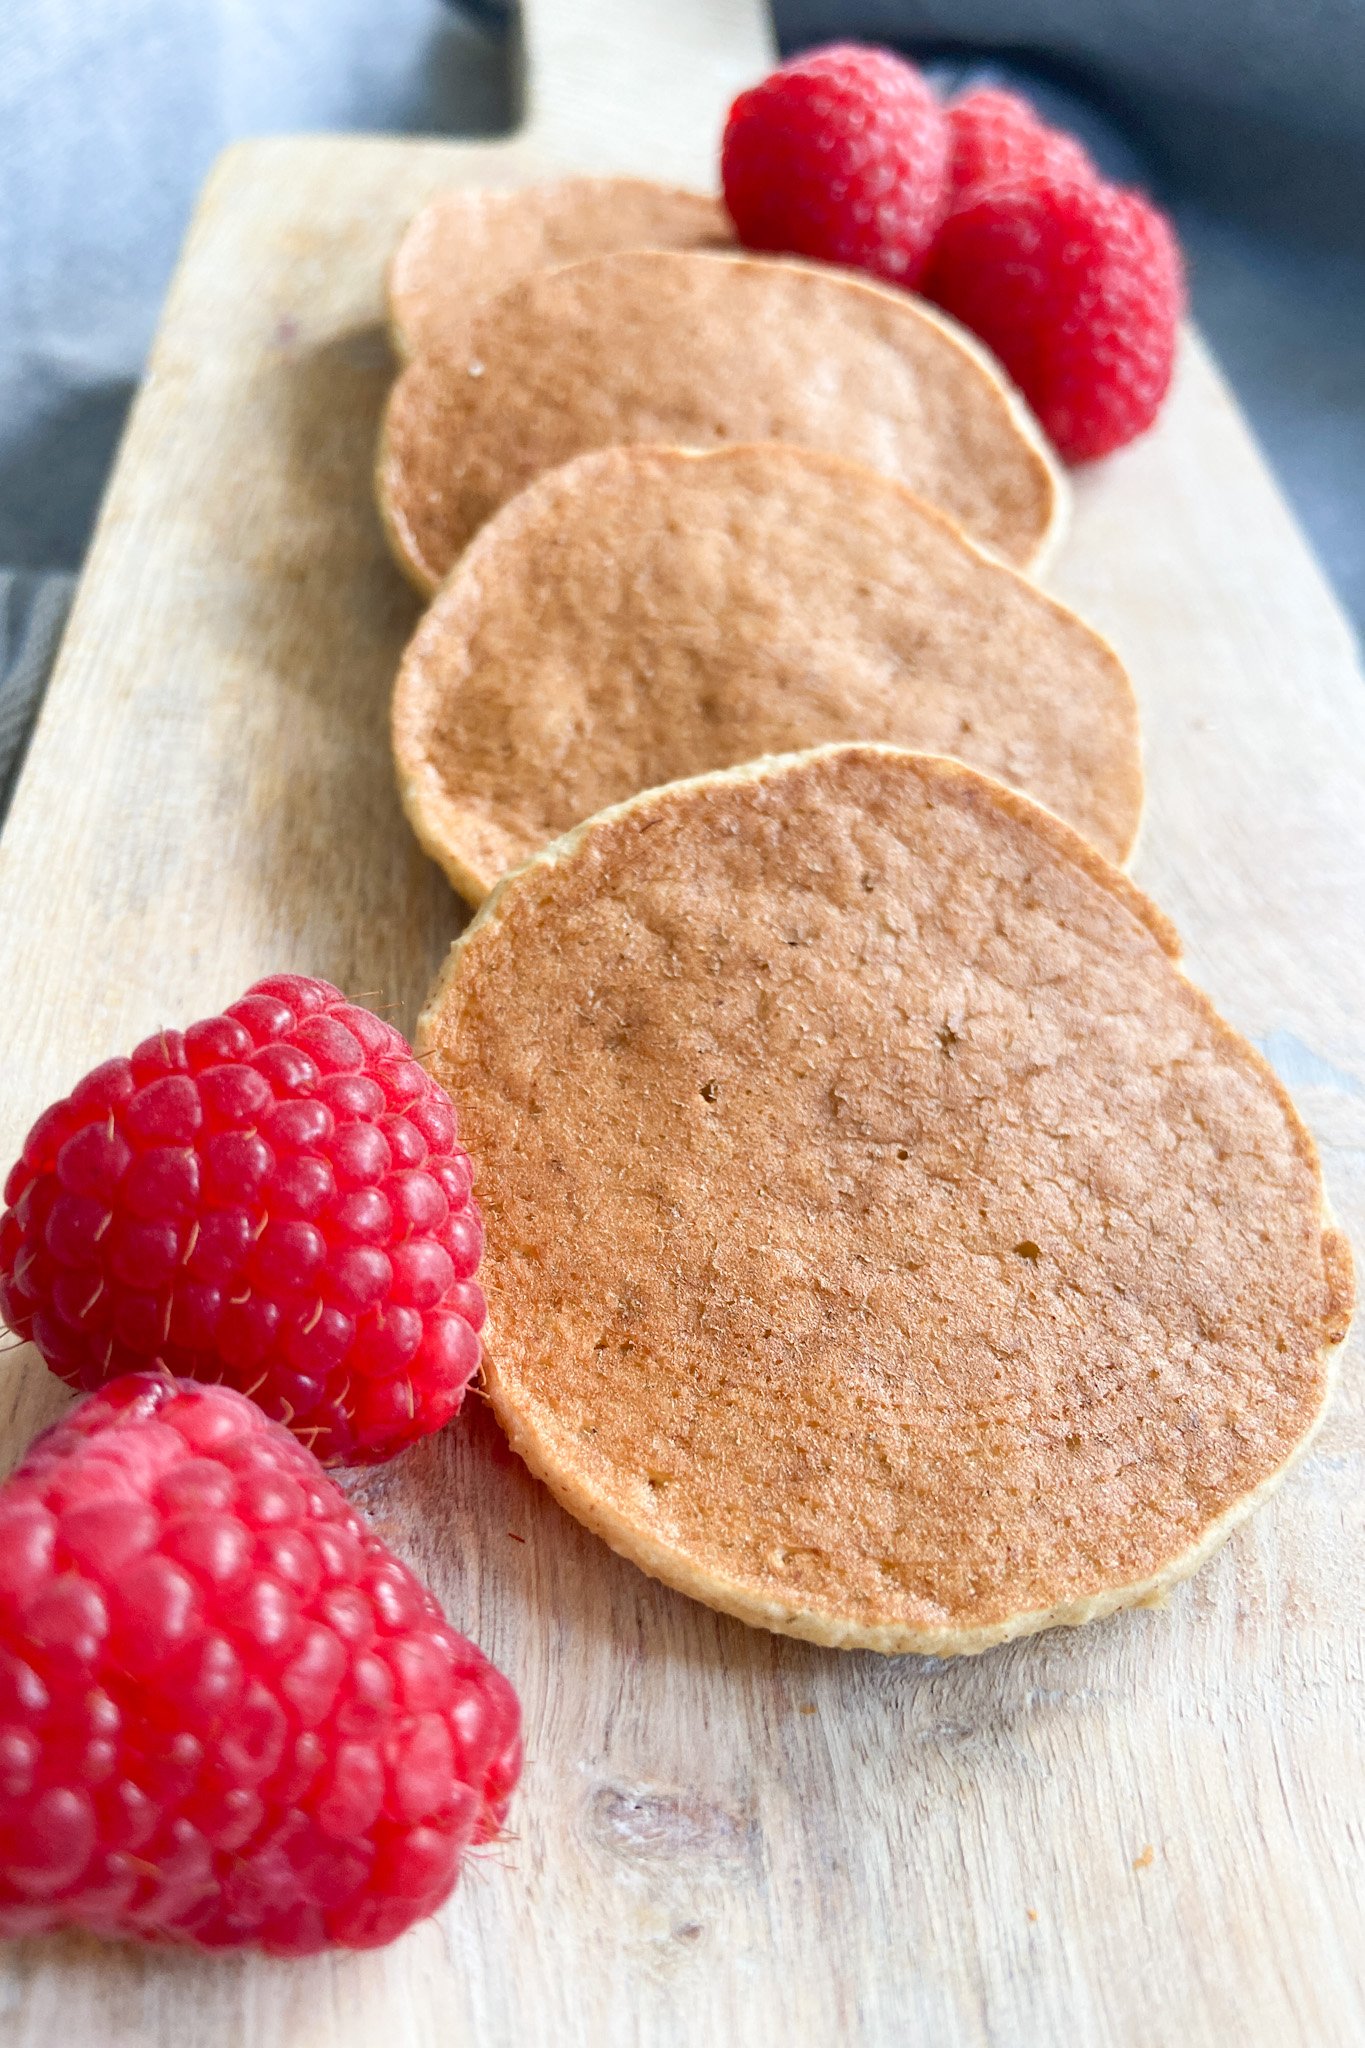 Pear pancakes served with a side of raspberries